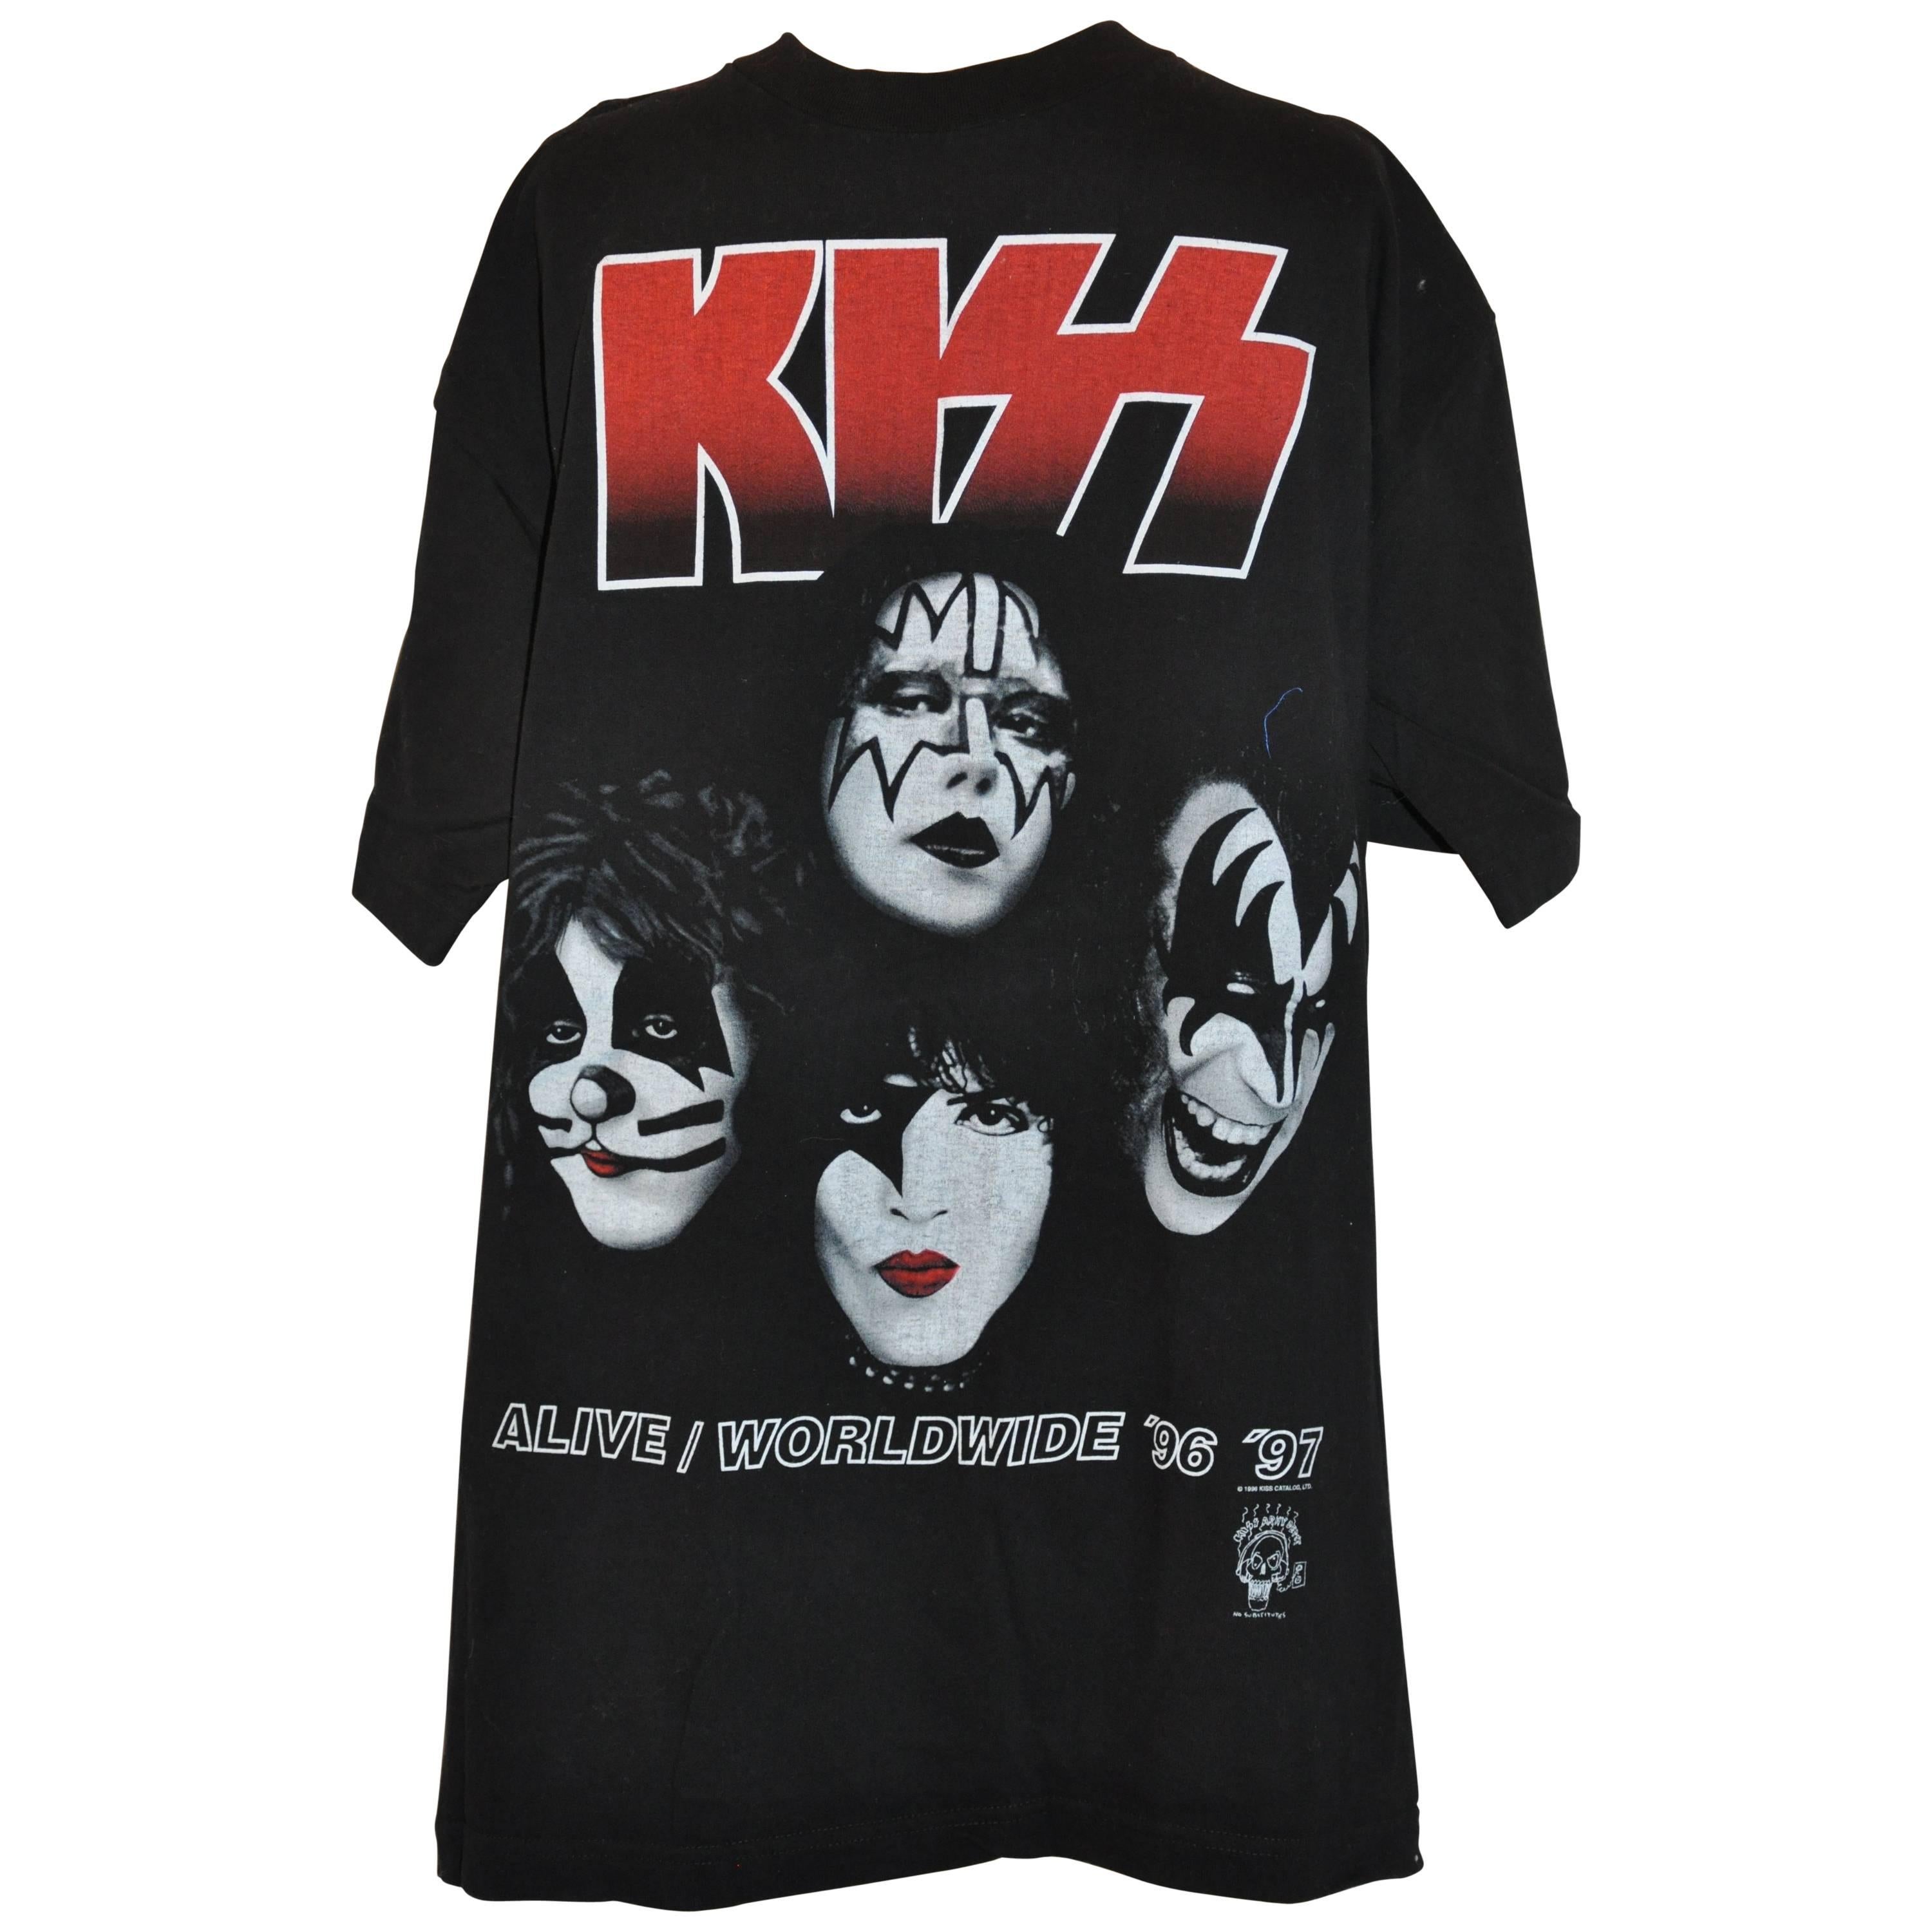 Iconic "KISS" "Alive Worldwide '96' '97' Tour Tee For Sale